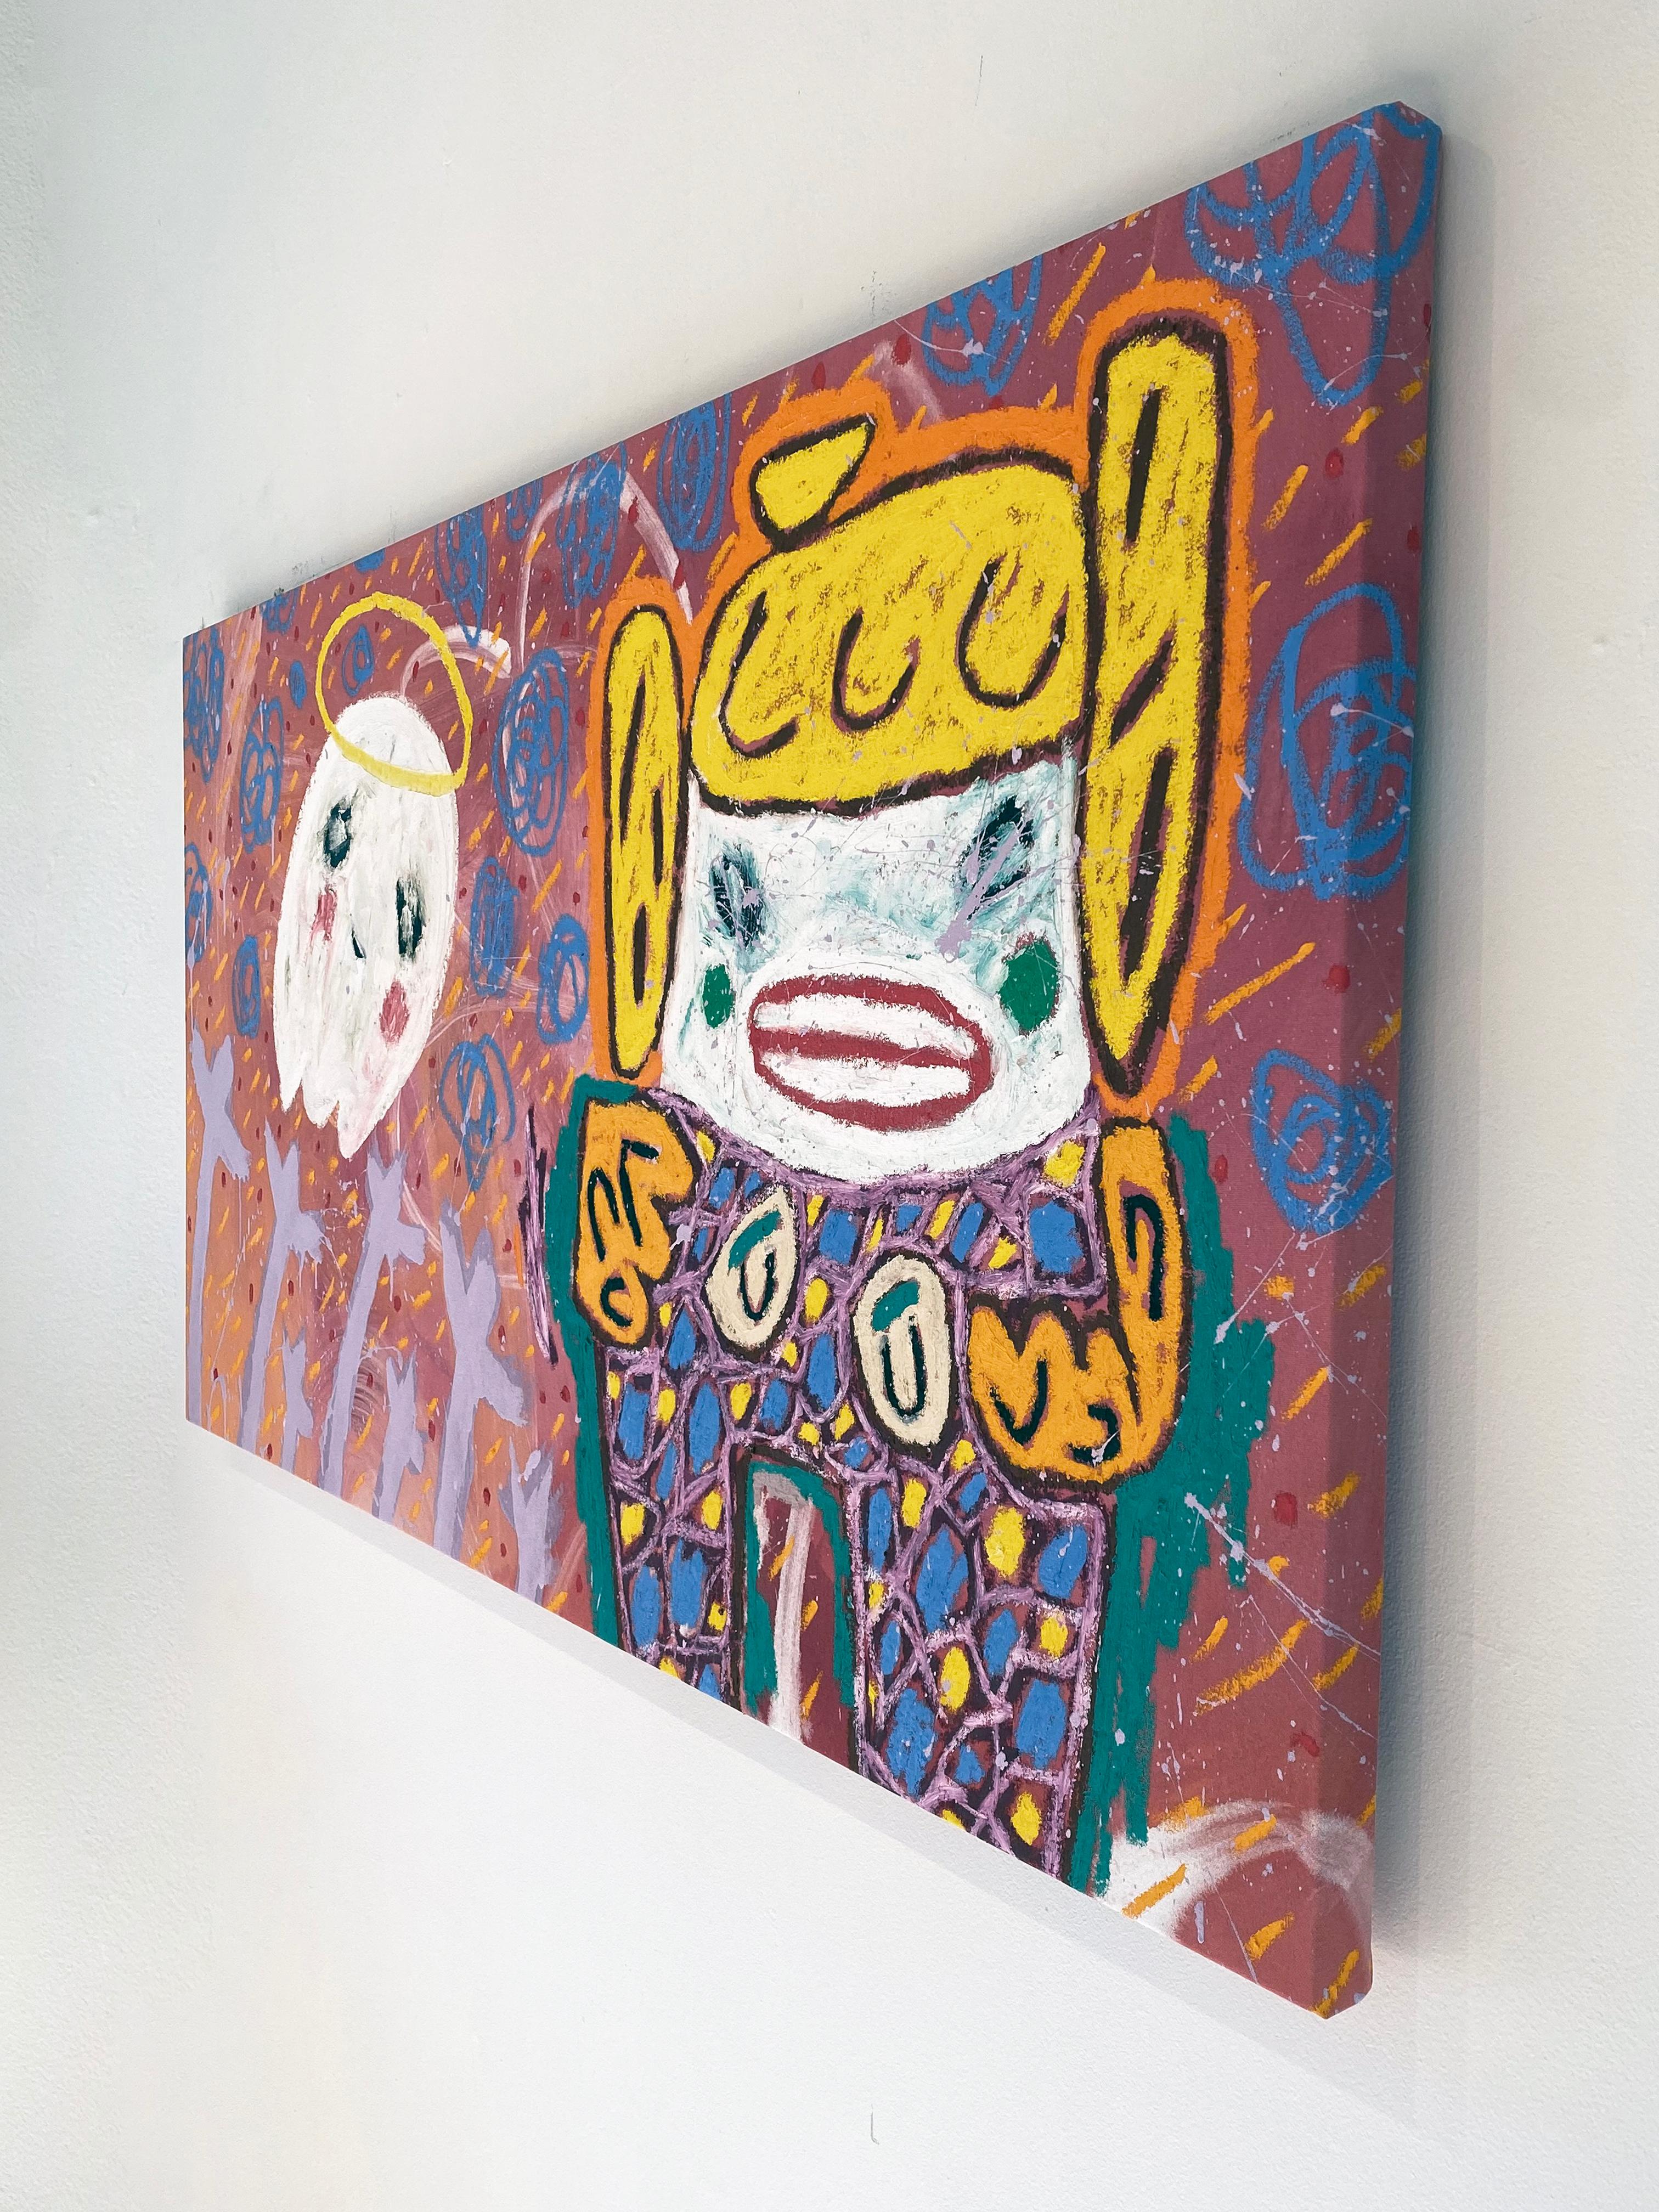 'Little Stinker Girl and Ghost Buddy Under Loving Skies' by Adam Handler, 2020. Oil stick and acrylic on canvas, 32 x 53 in. This painting by contemporary artist Adam Handler features a girl and ghost together in his signature faux-naif, child-like